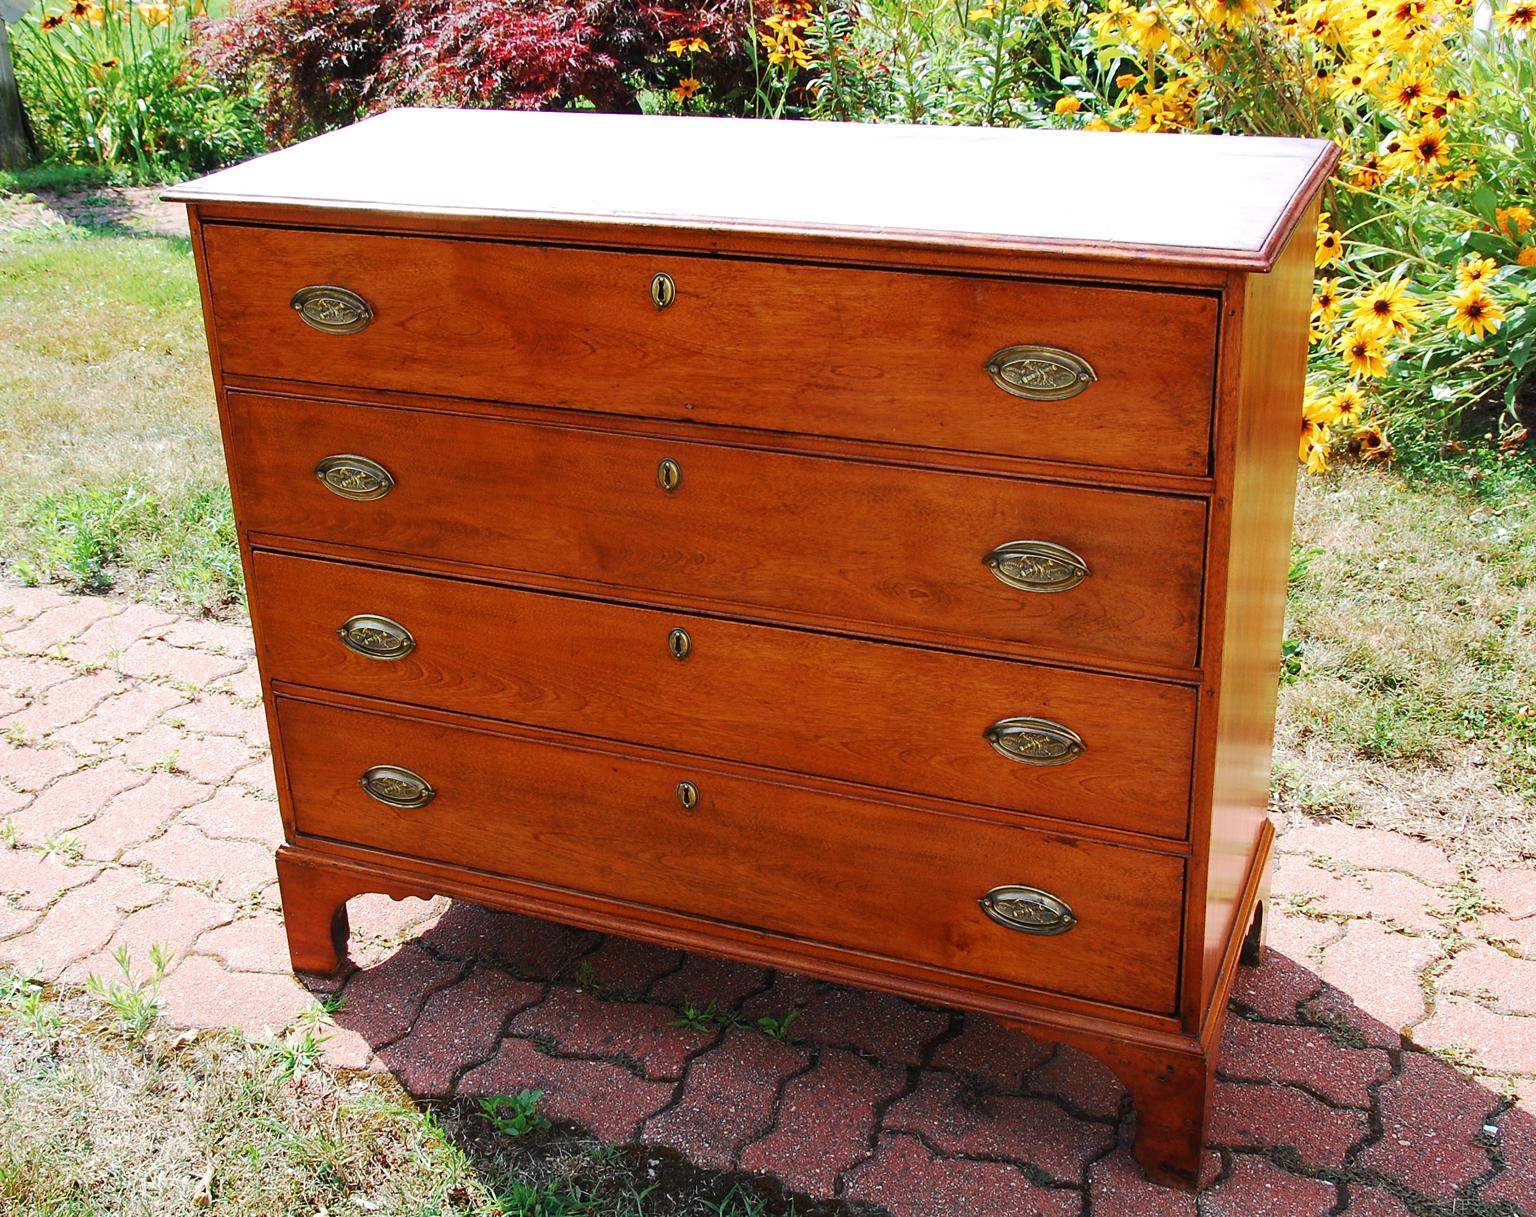 American Federal period maple chest of four graduated drawers with thumbnail molding to carcass and molded bracket base and top. The timber was chosen carefully for this chest, the carcass and drawers having very straight graining while the top has